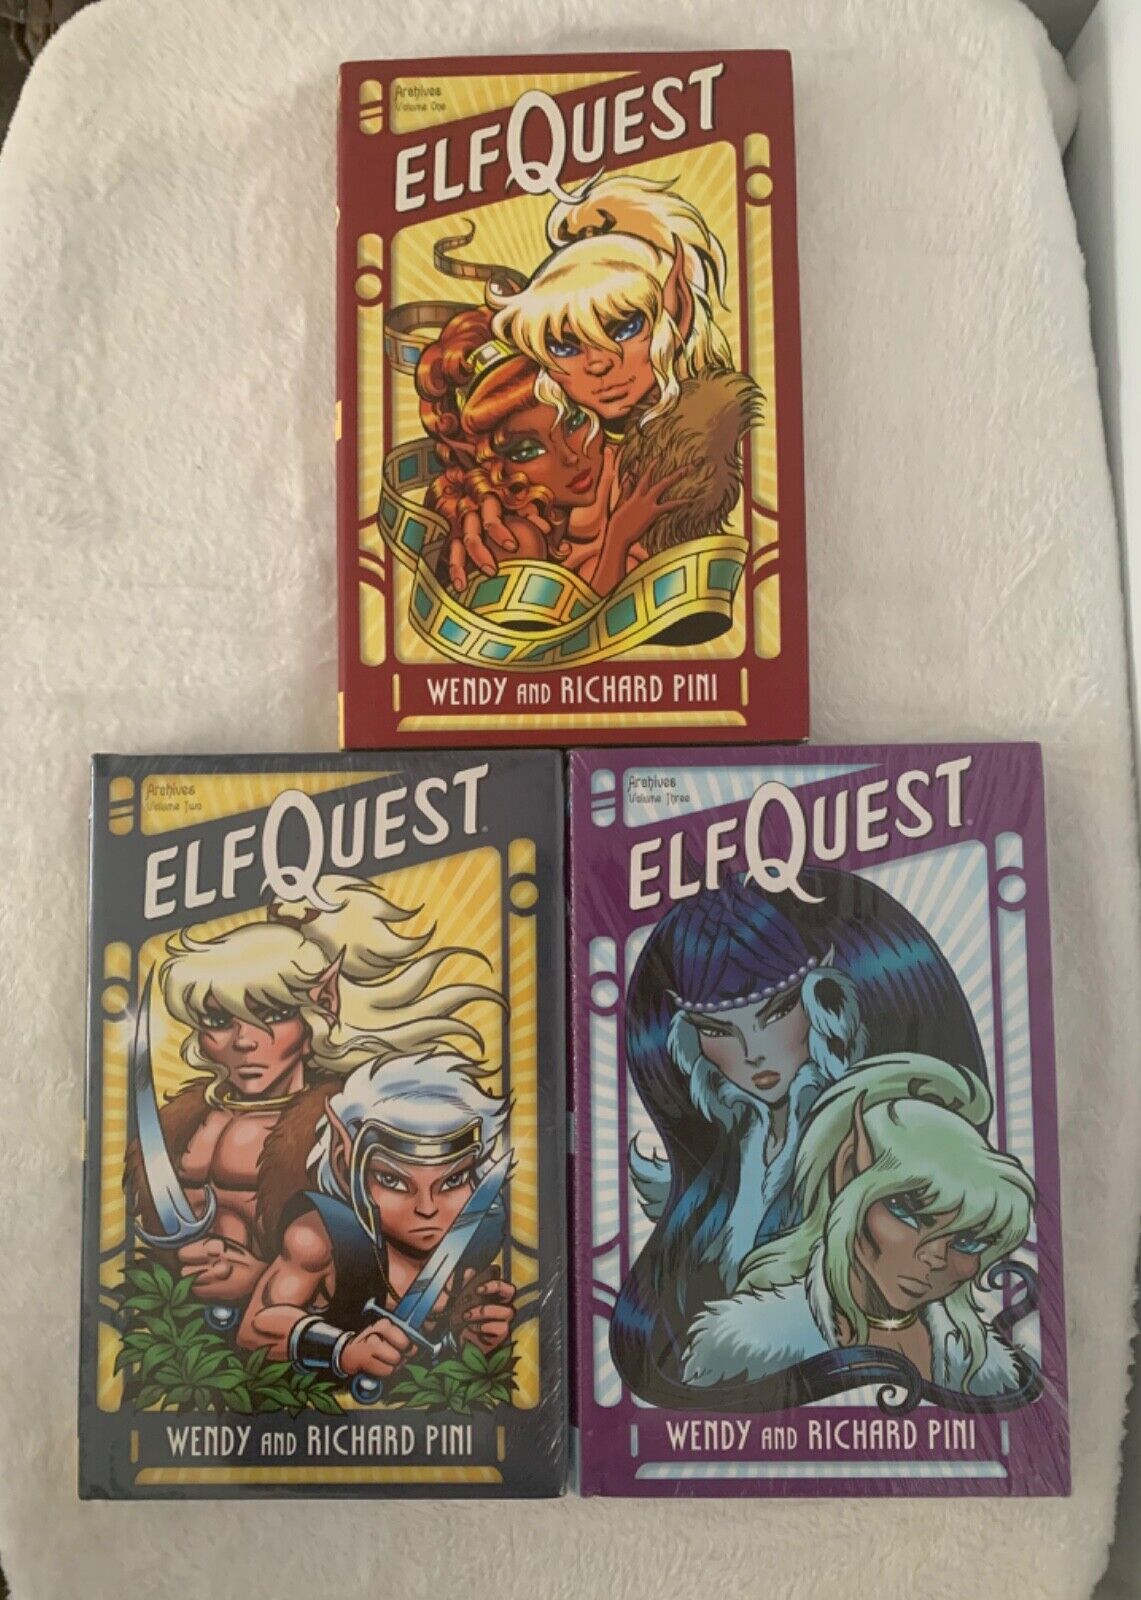 ElfQuest Archives Volume 1-3 Books Wendy and Richard Pini (2 Sealed & 1 Open)